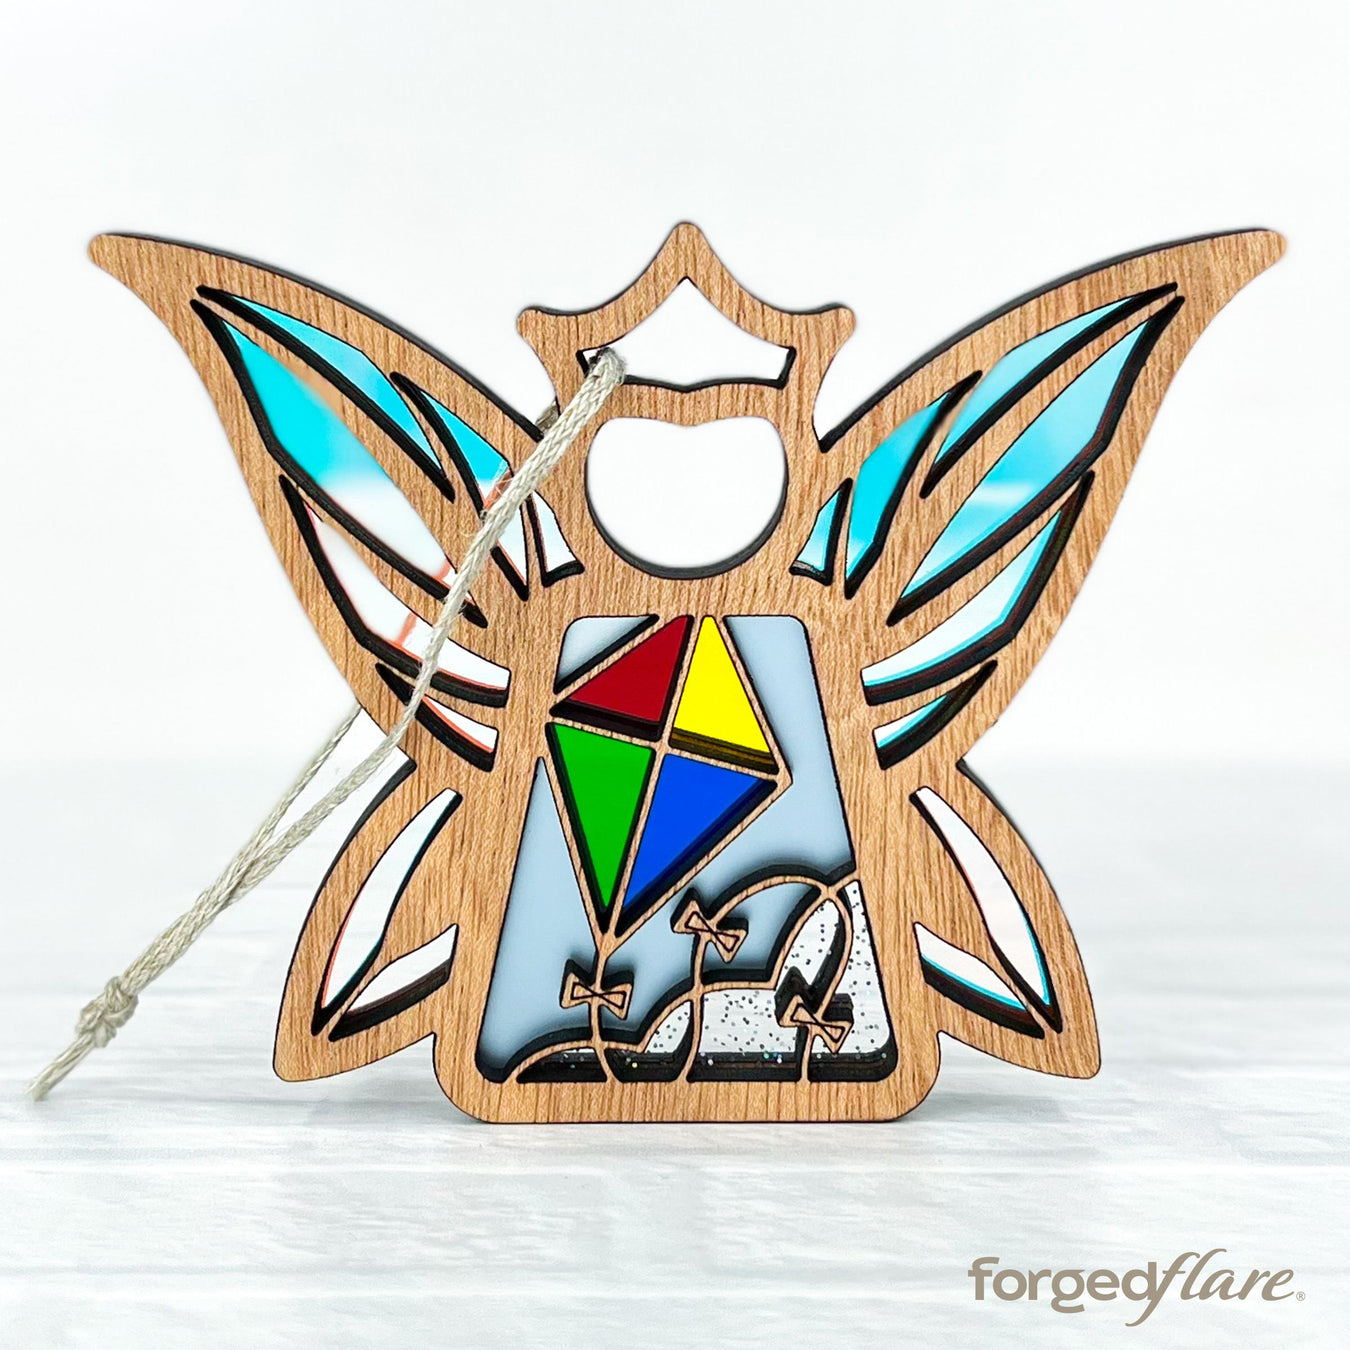 Fly a Kite for Charity Fairy ornament benefiting Youth Villages.